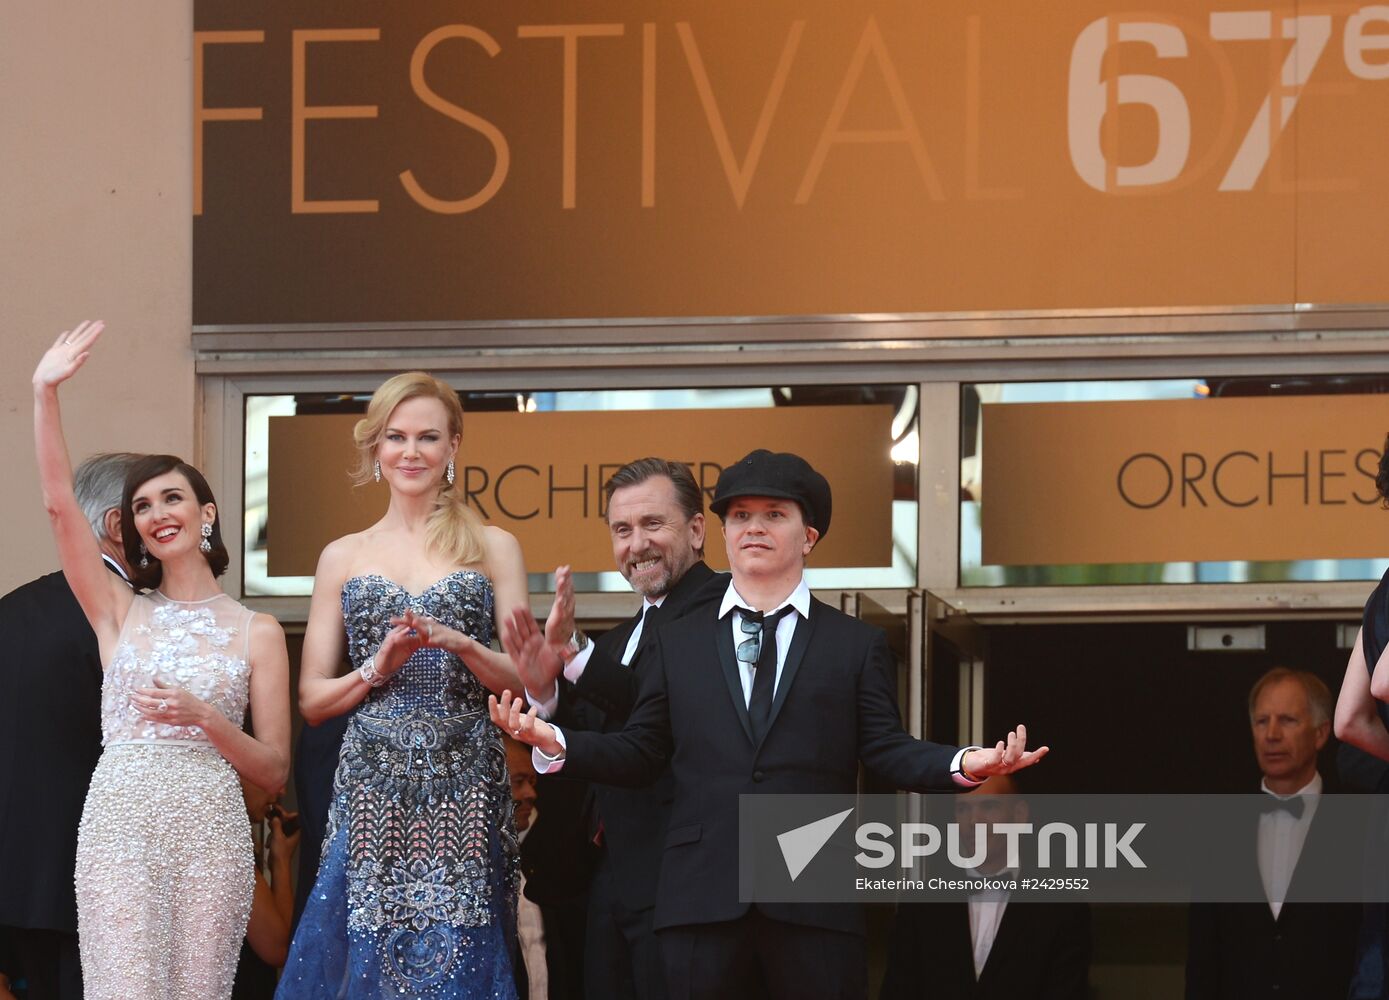 Opening ceremony for 67th Cannes Film Festival